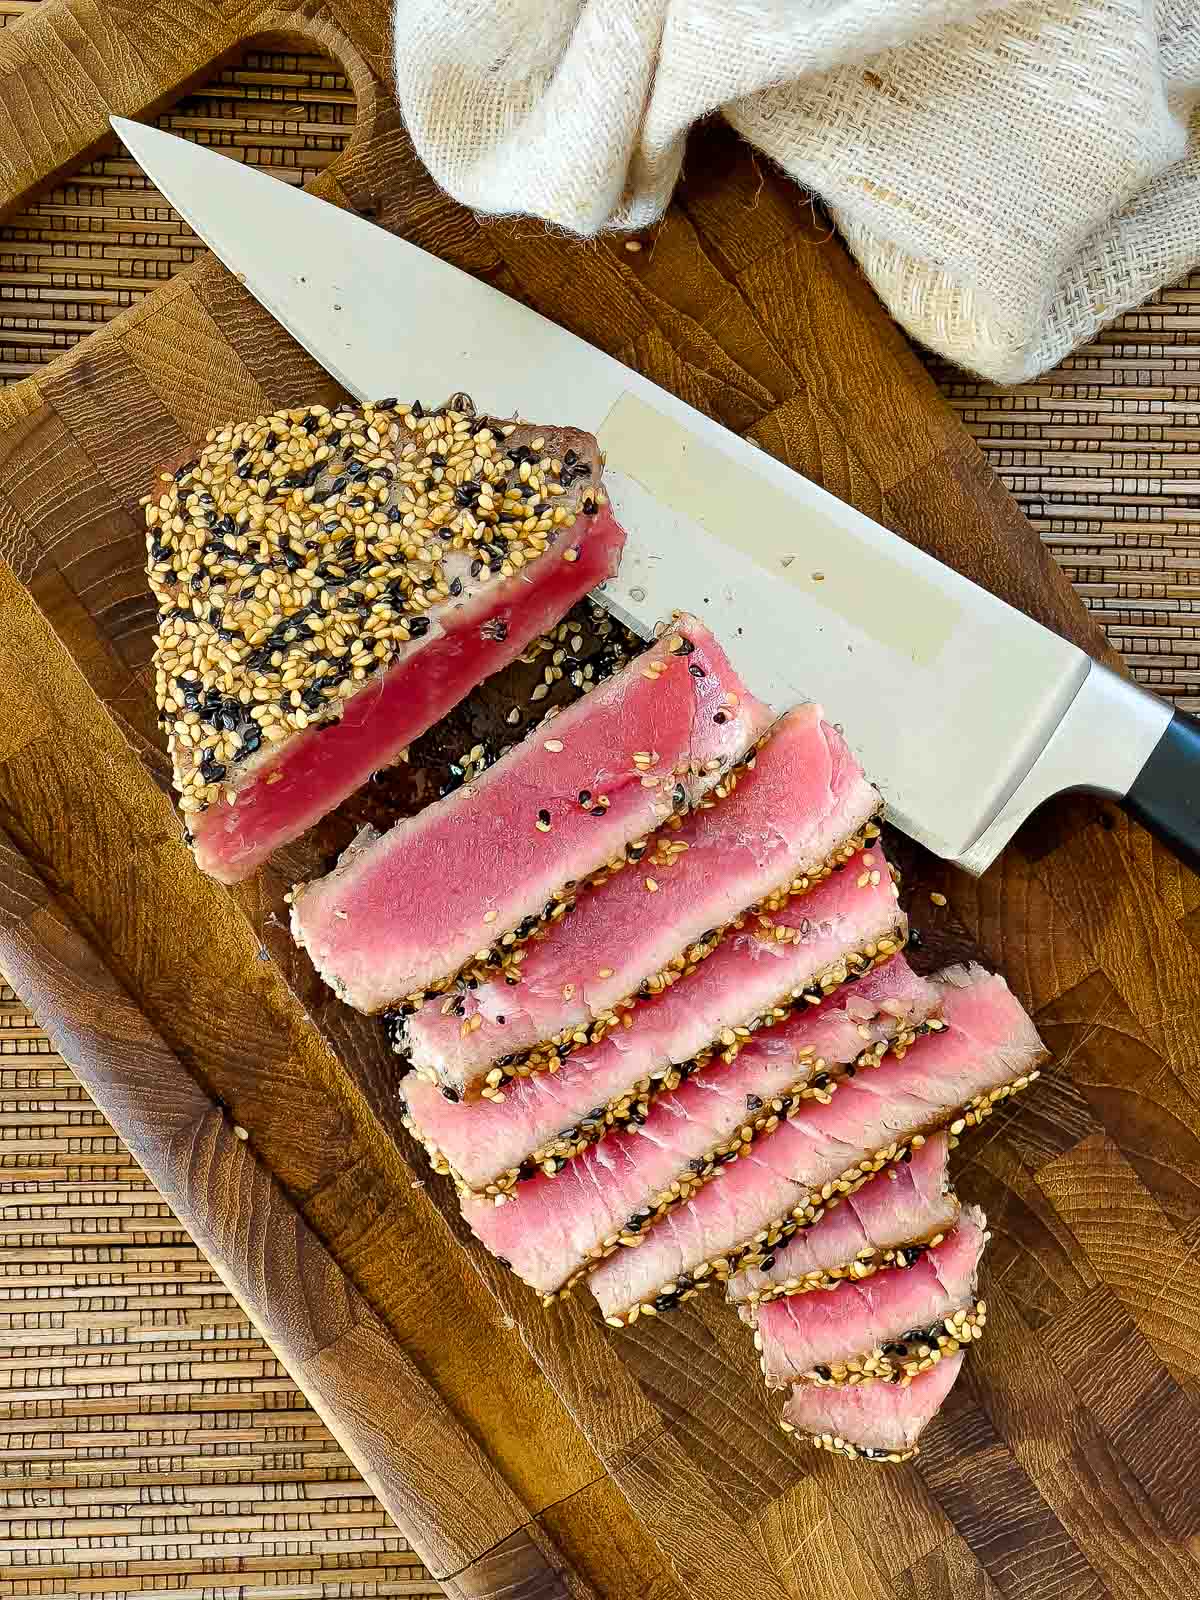 Beautifully seared tuna steak sliced on a wooden cutting board with a chef's knife on the side.